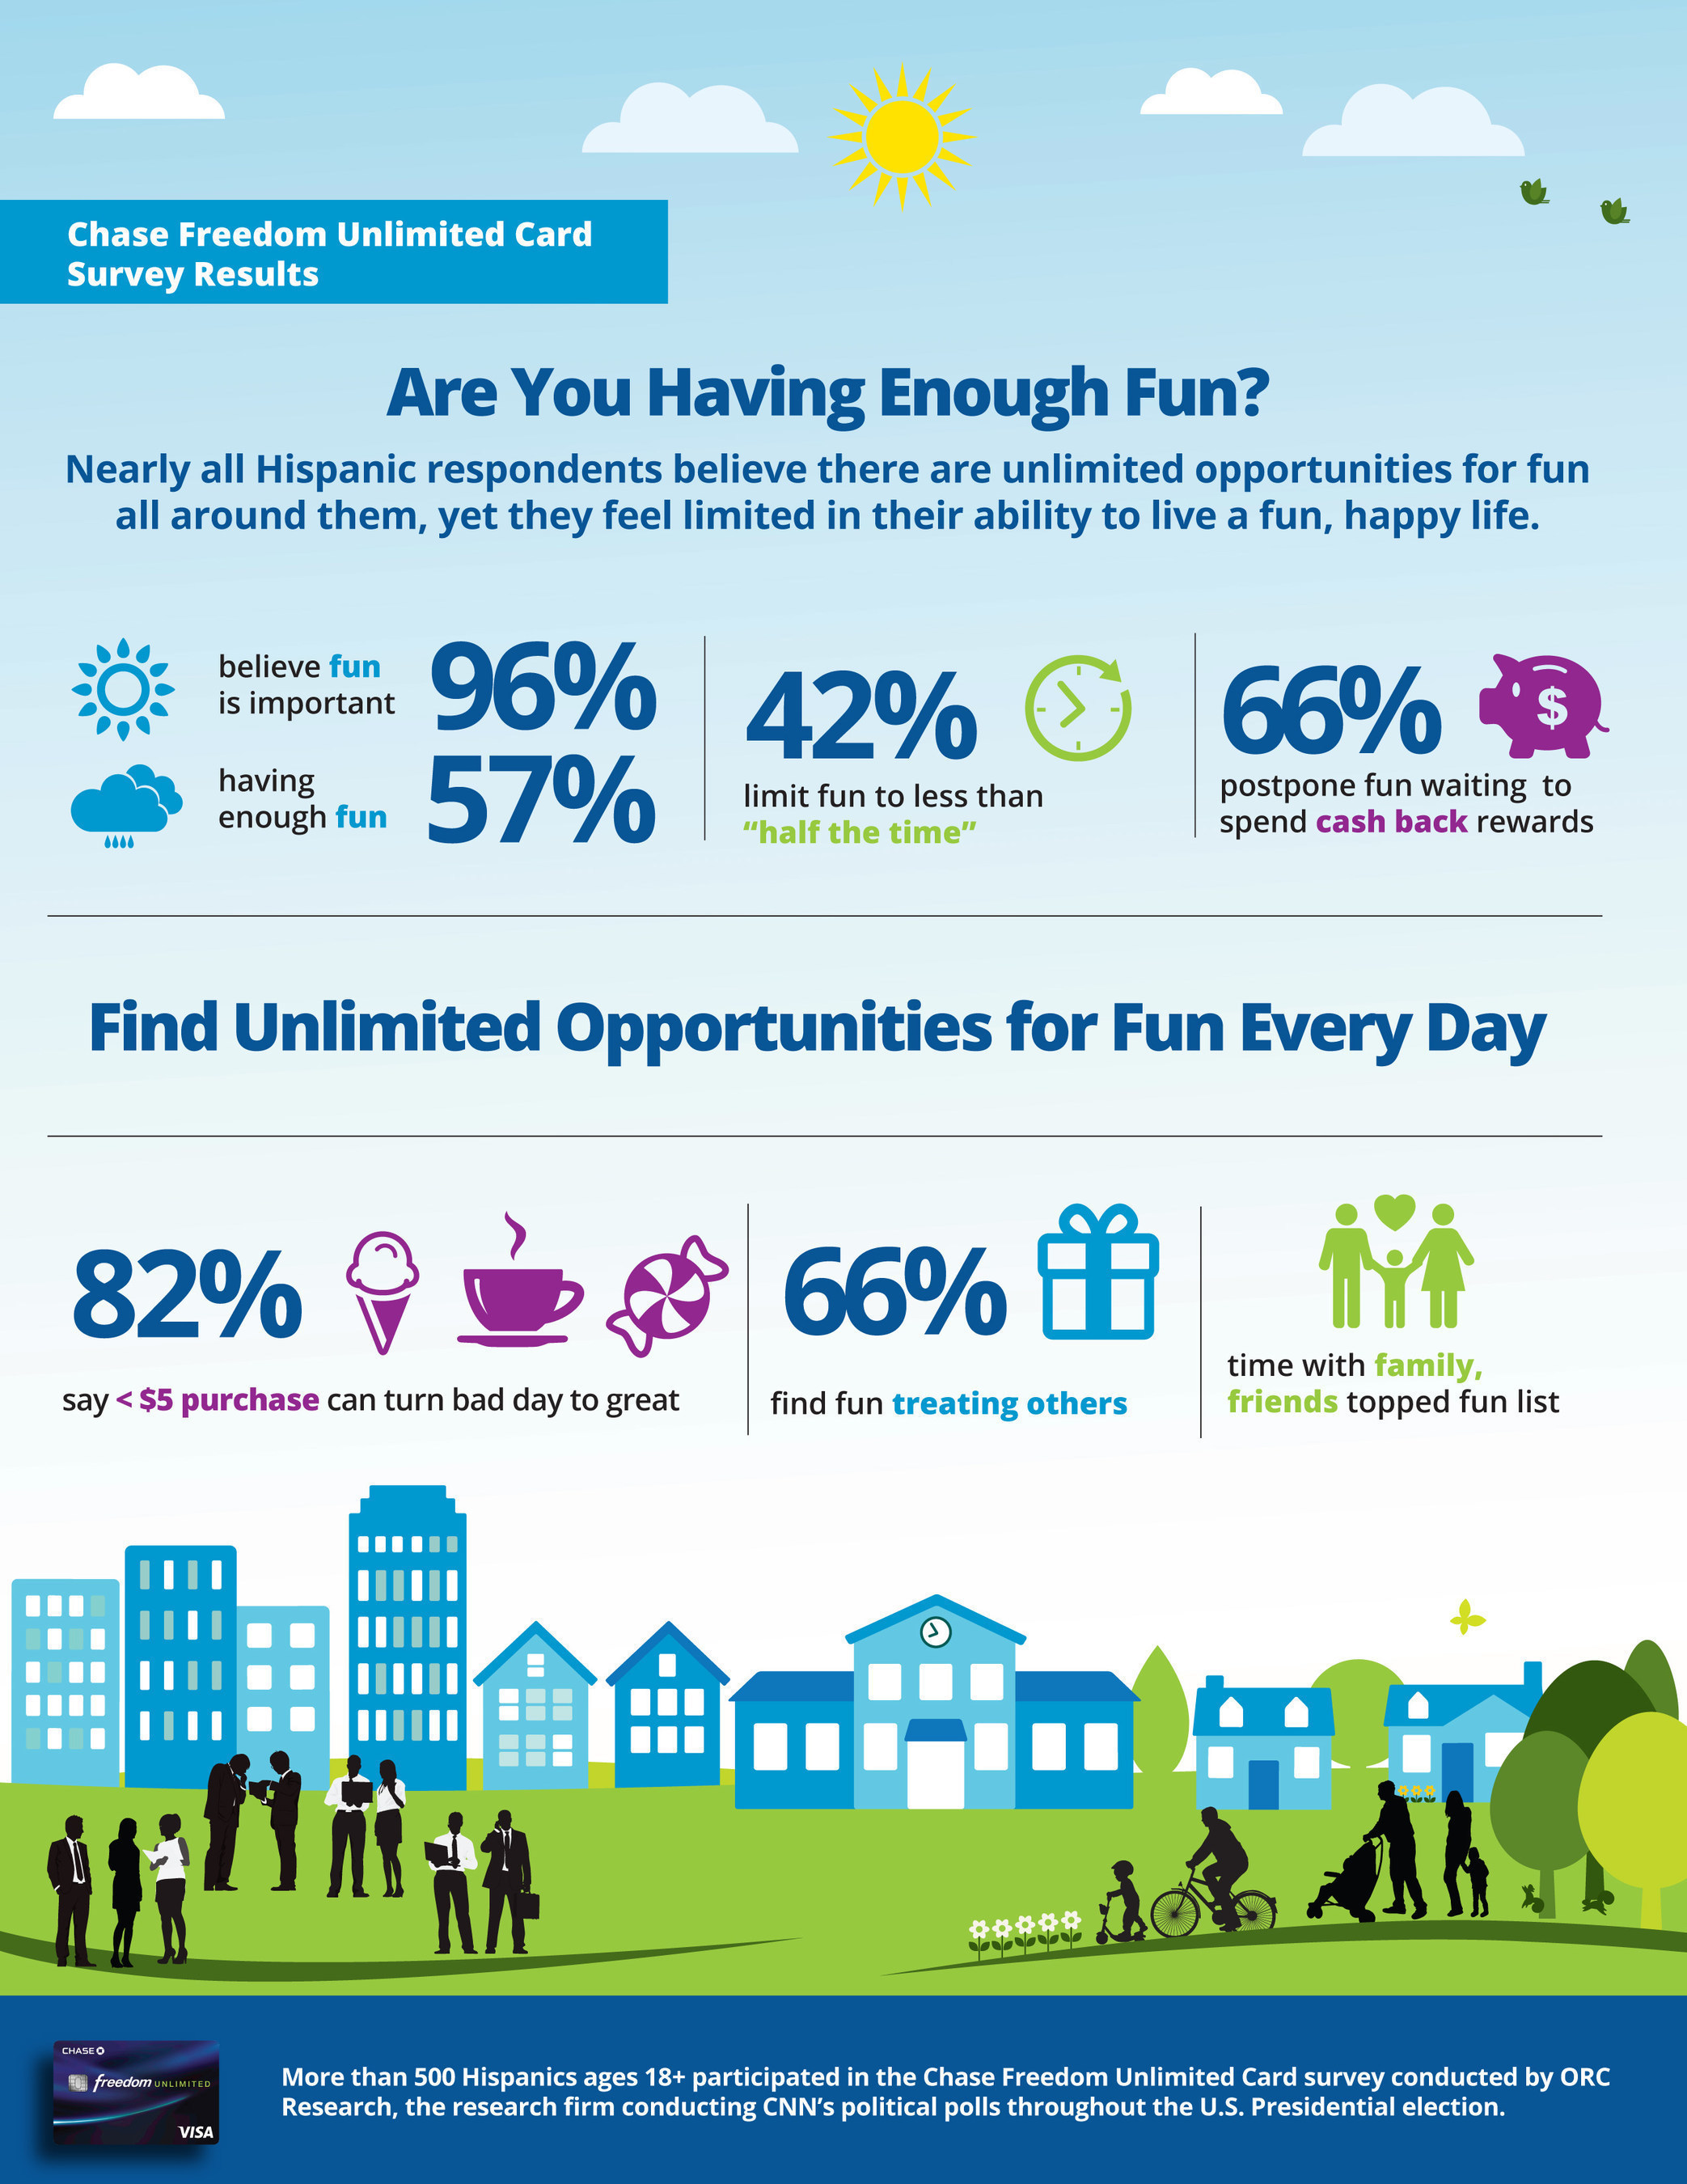 New Chase Freedom Unlimited Card Survey Reveals a "Fun Gap" among U.S. Consumers